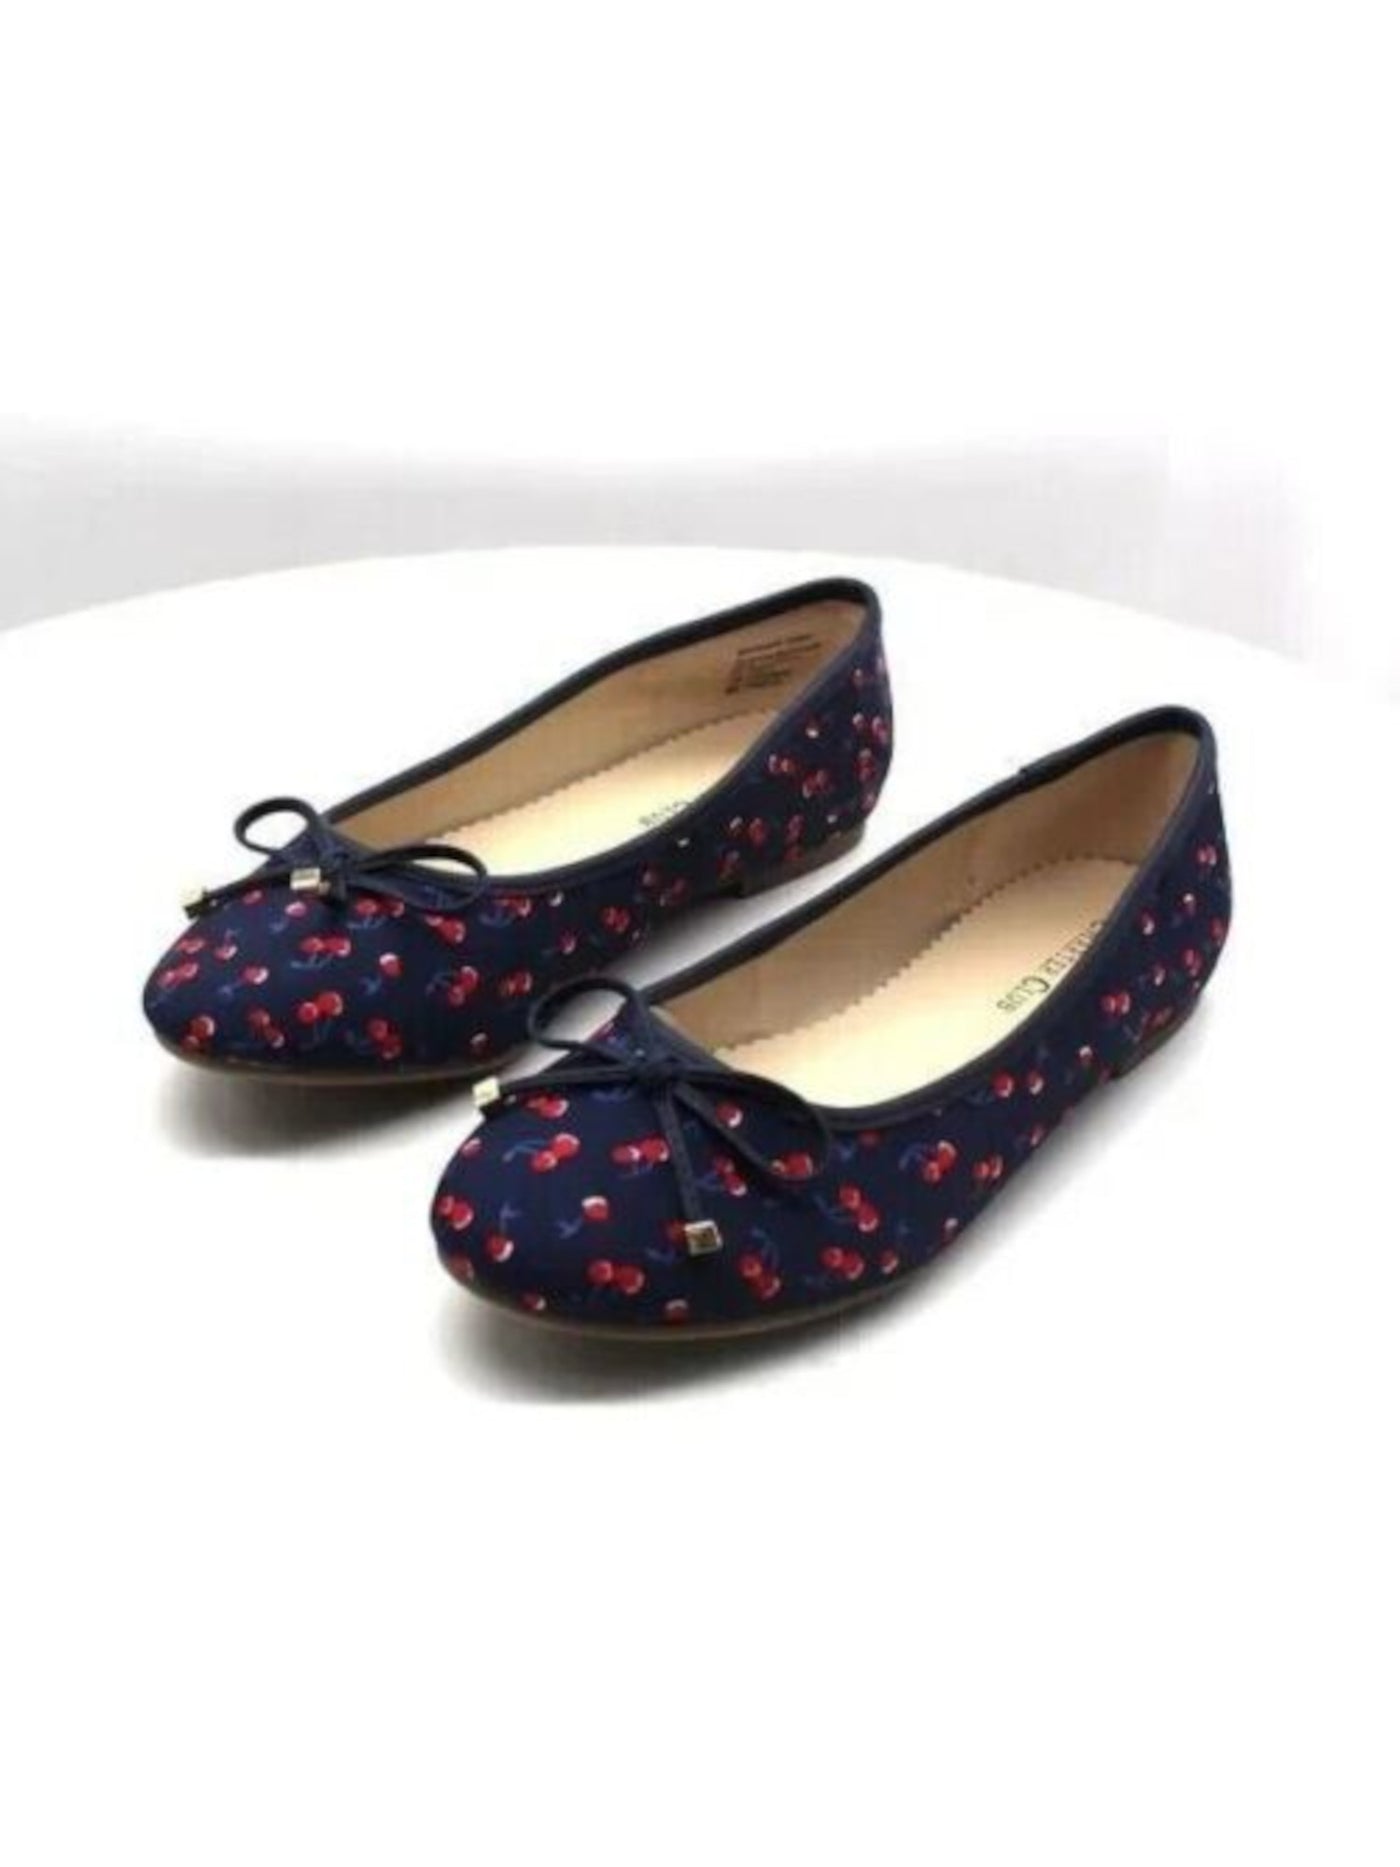 CHARTER CLUB Womens Navy Cherries Bow Accent Comfort Kaii Round Toe Slip On Ballet Flats 9 M